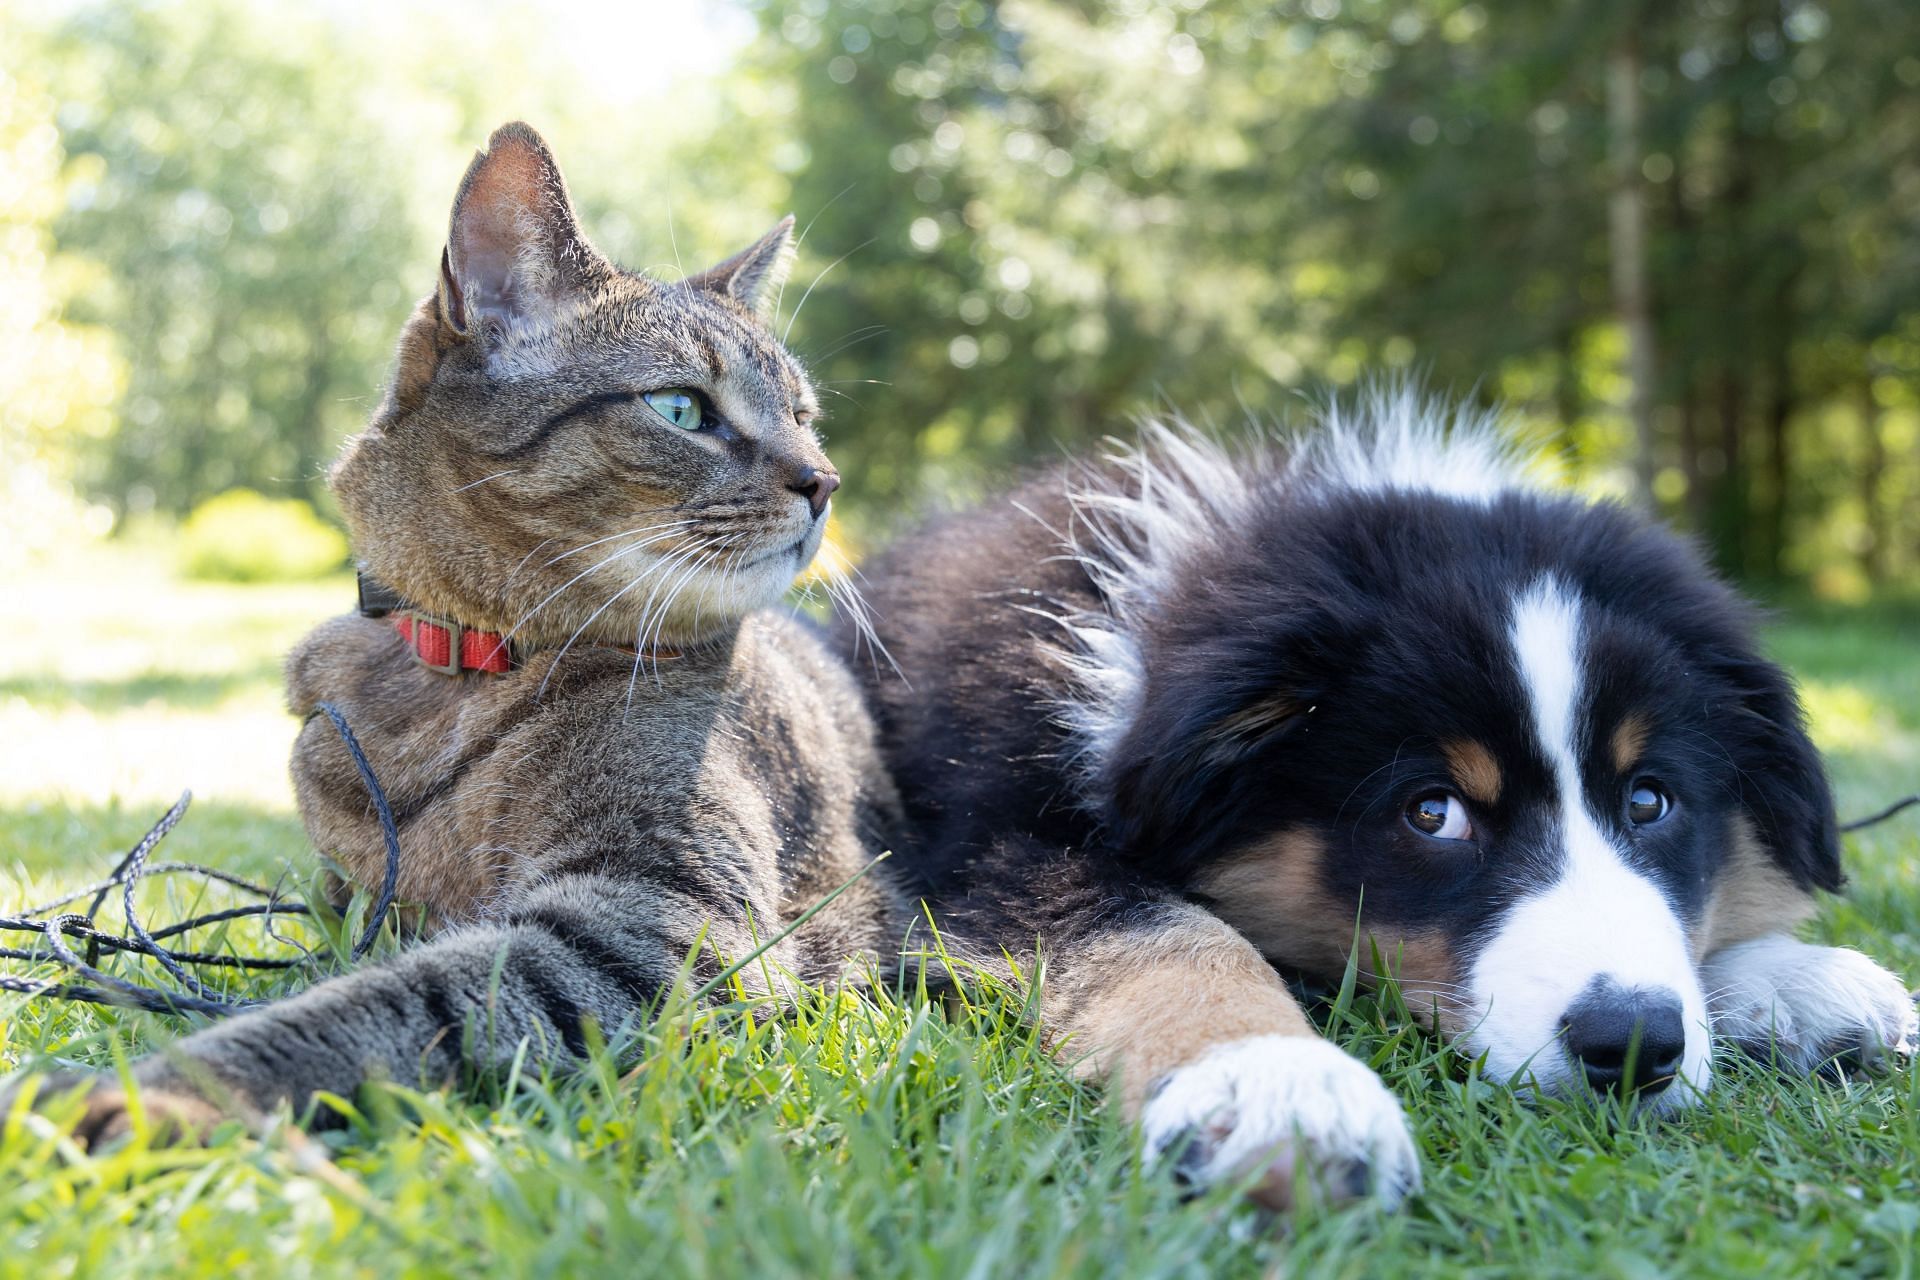 Vegan pet diets and theor safety (Image via Unsplash/Andrew S)